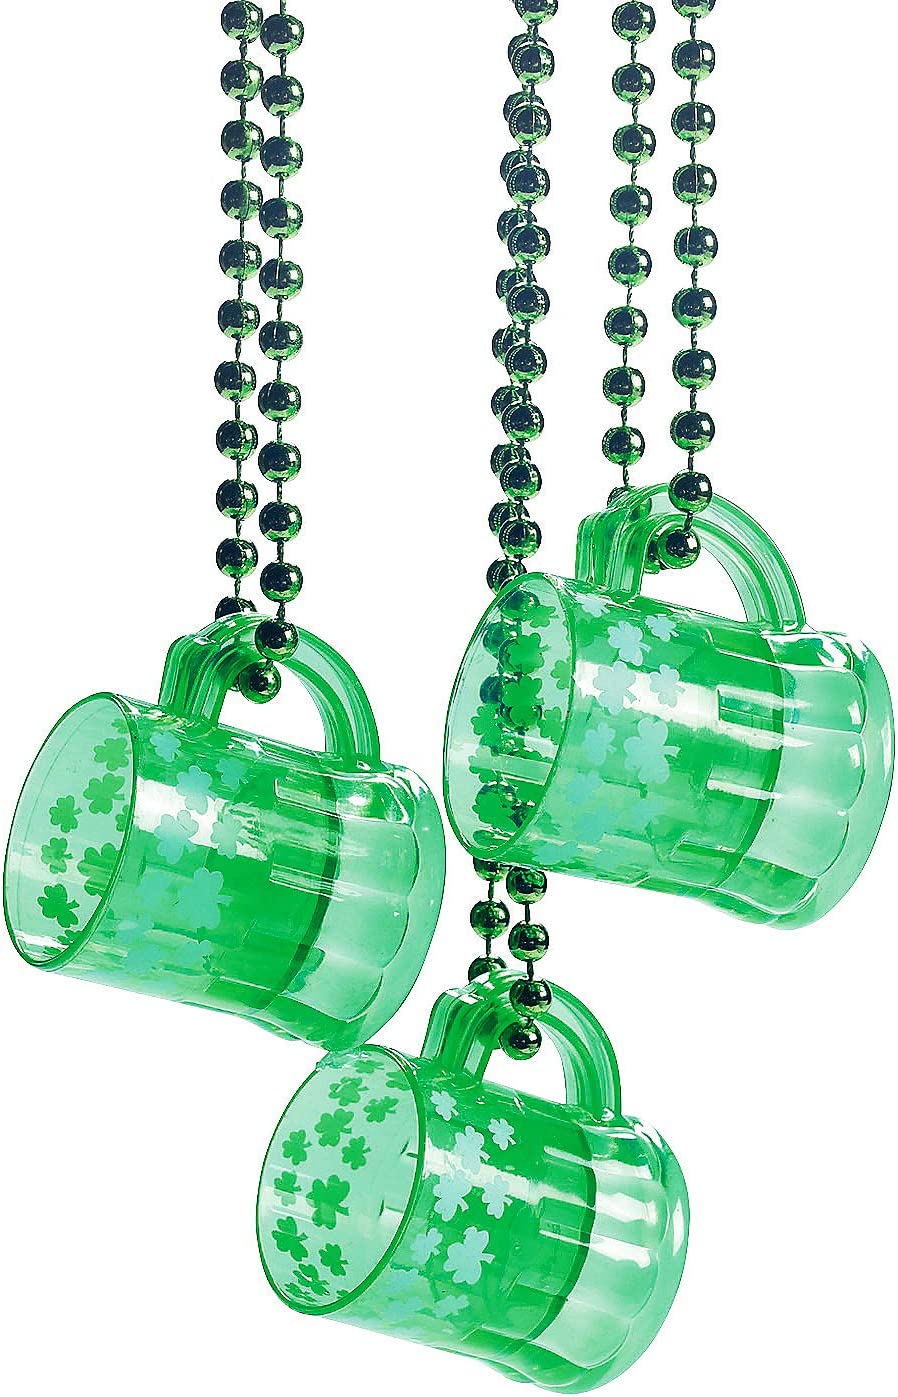 4E's Novelty St Patricks Day Beads Necklace With Shot Glasses Beer Mug Pack of 12 – Green Irish Gifts Party Favors Supplies, Costume Accessories (Transparent Green With Shamrock)